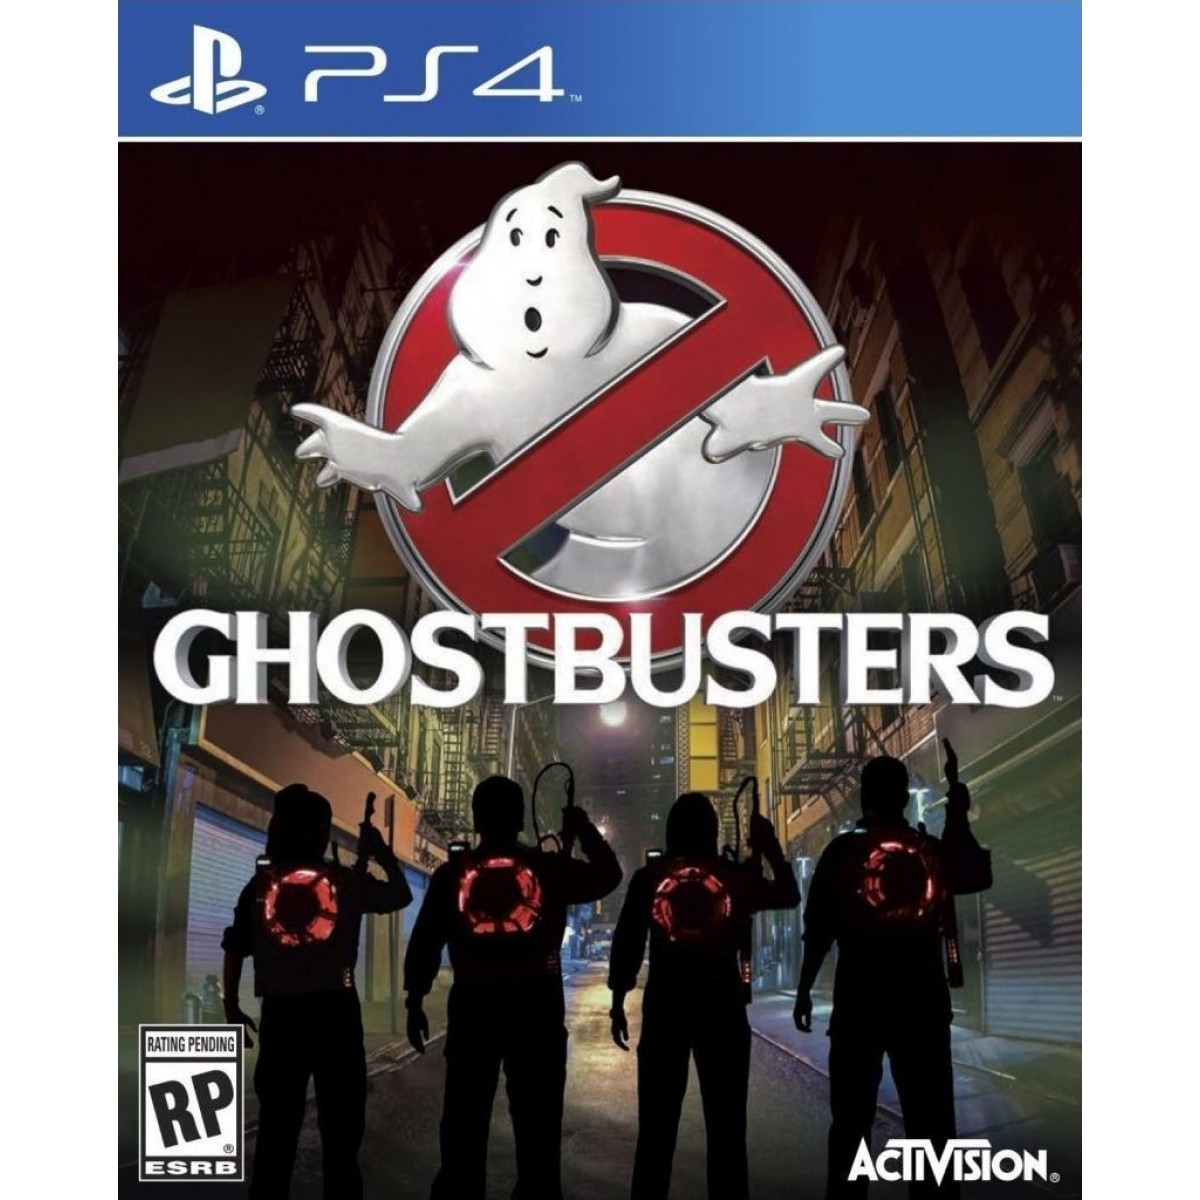 PS4 GHOSTBUSTERS GAME